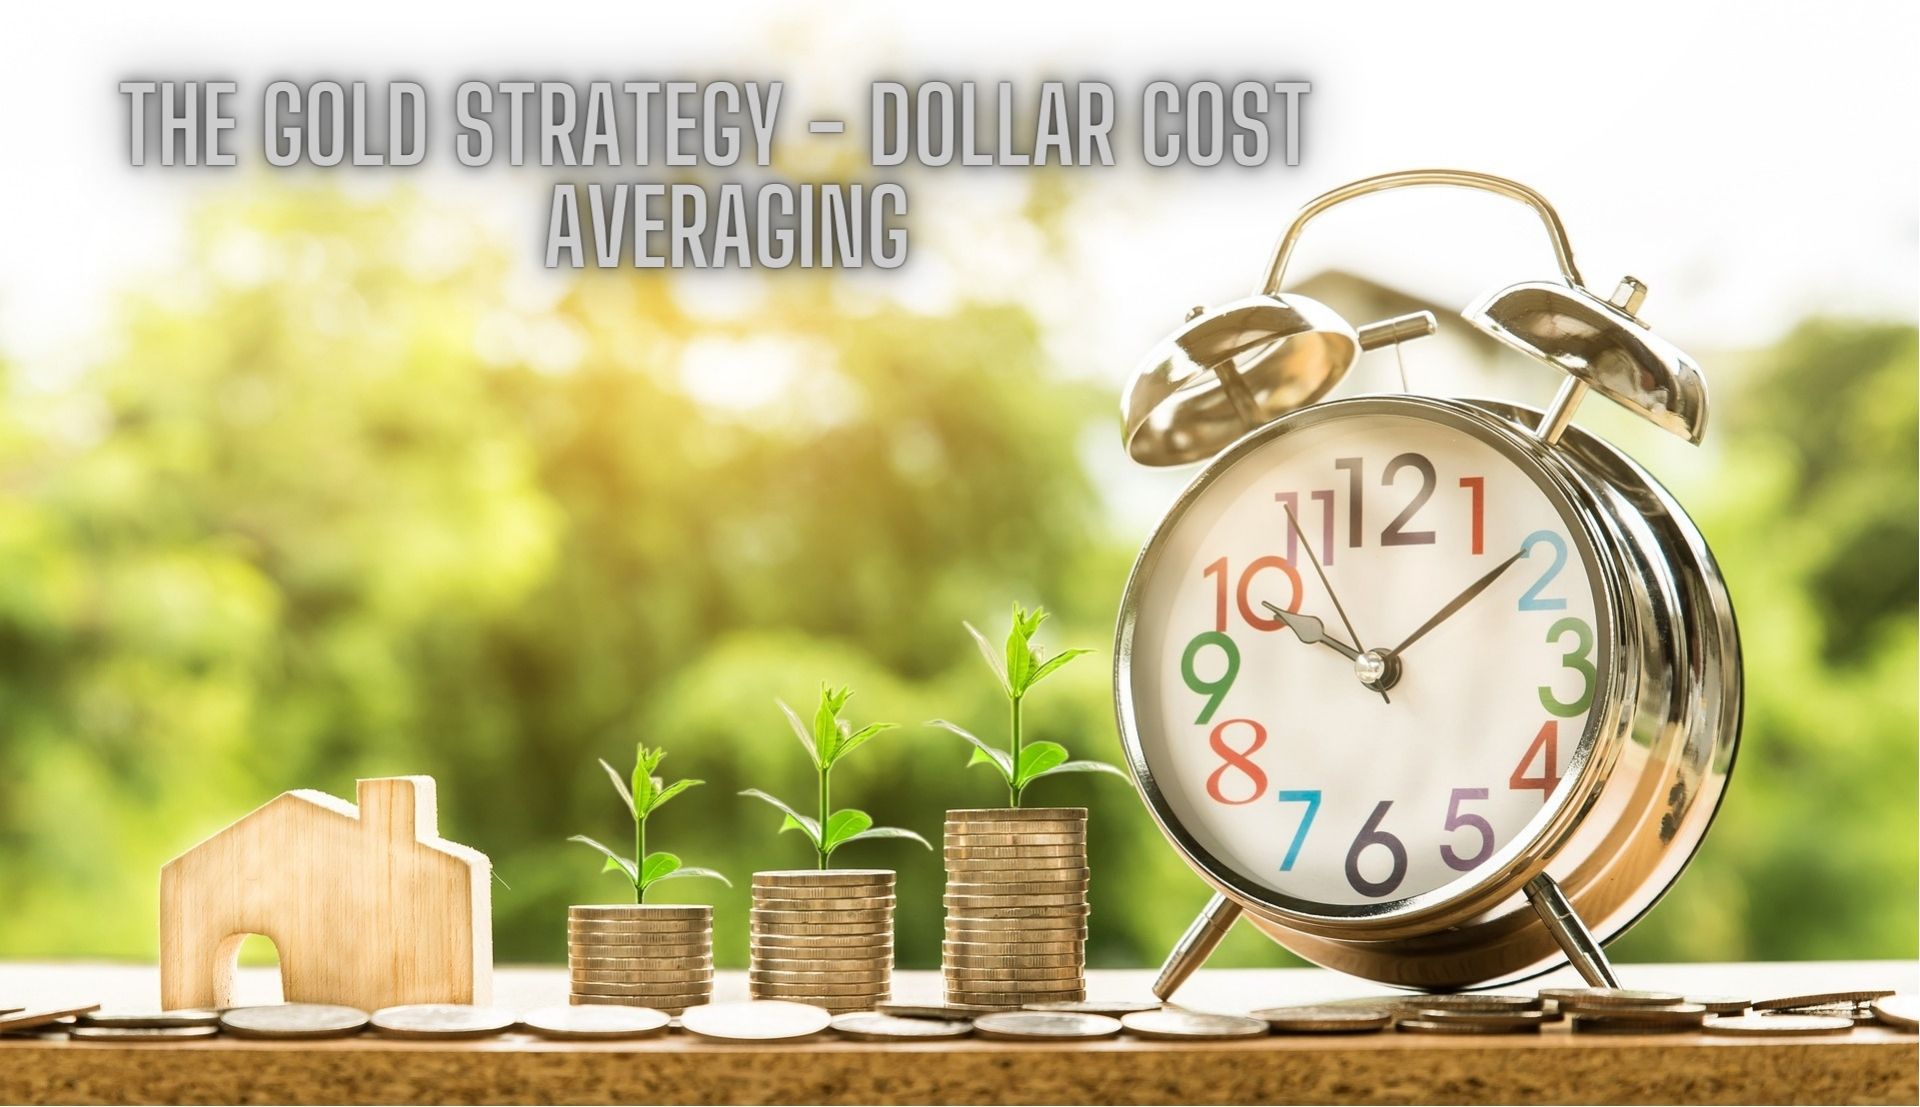 THE GOLD STRATEGY  DOLLAR COST AVERAGING.jpg